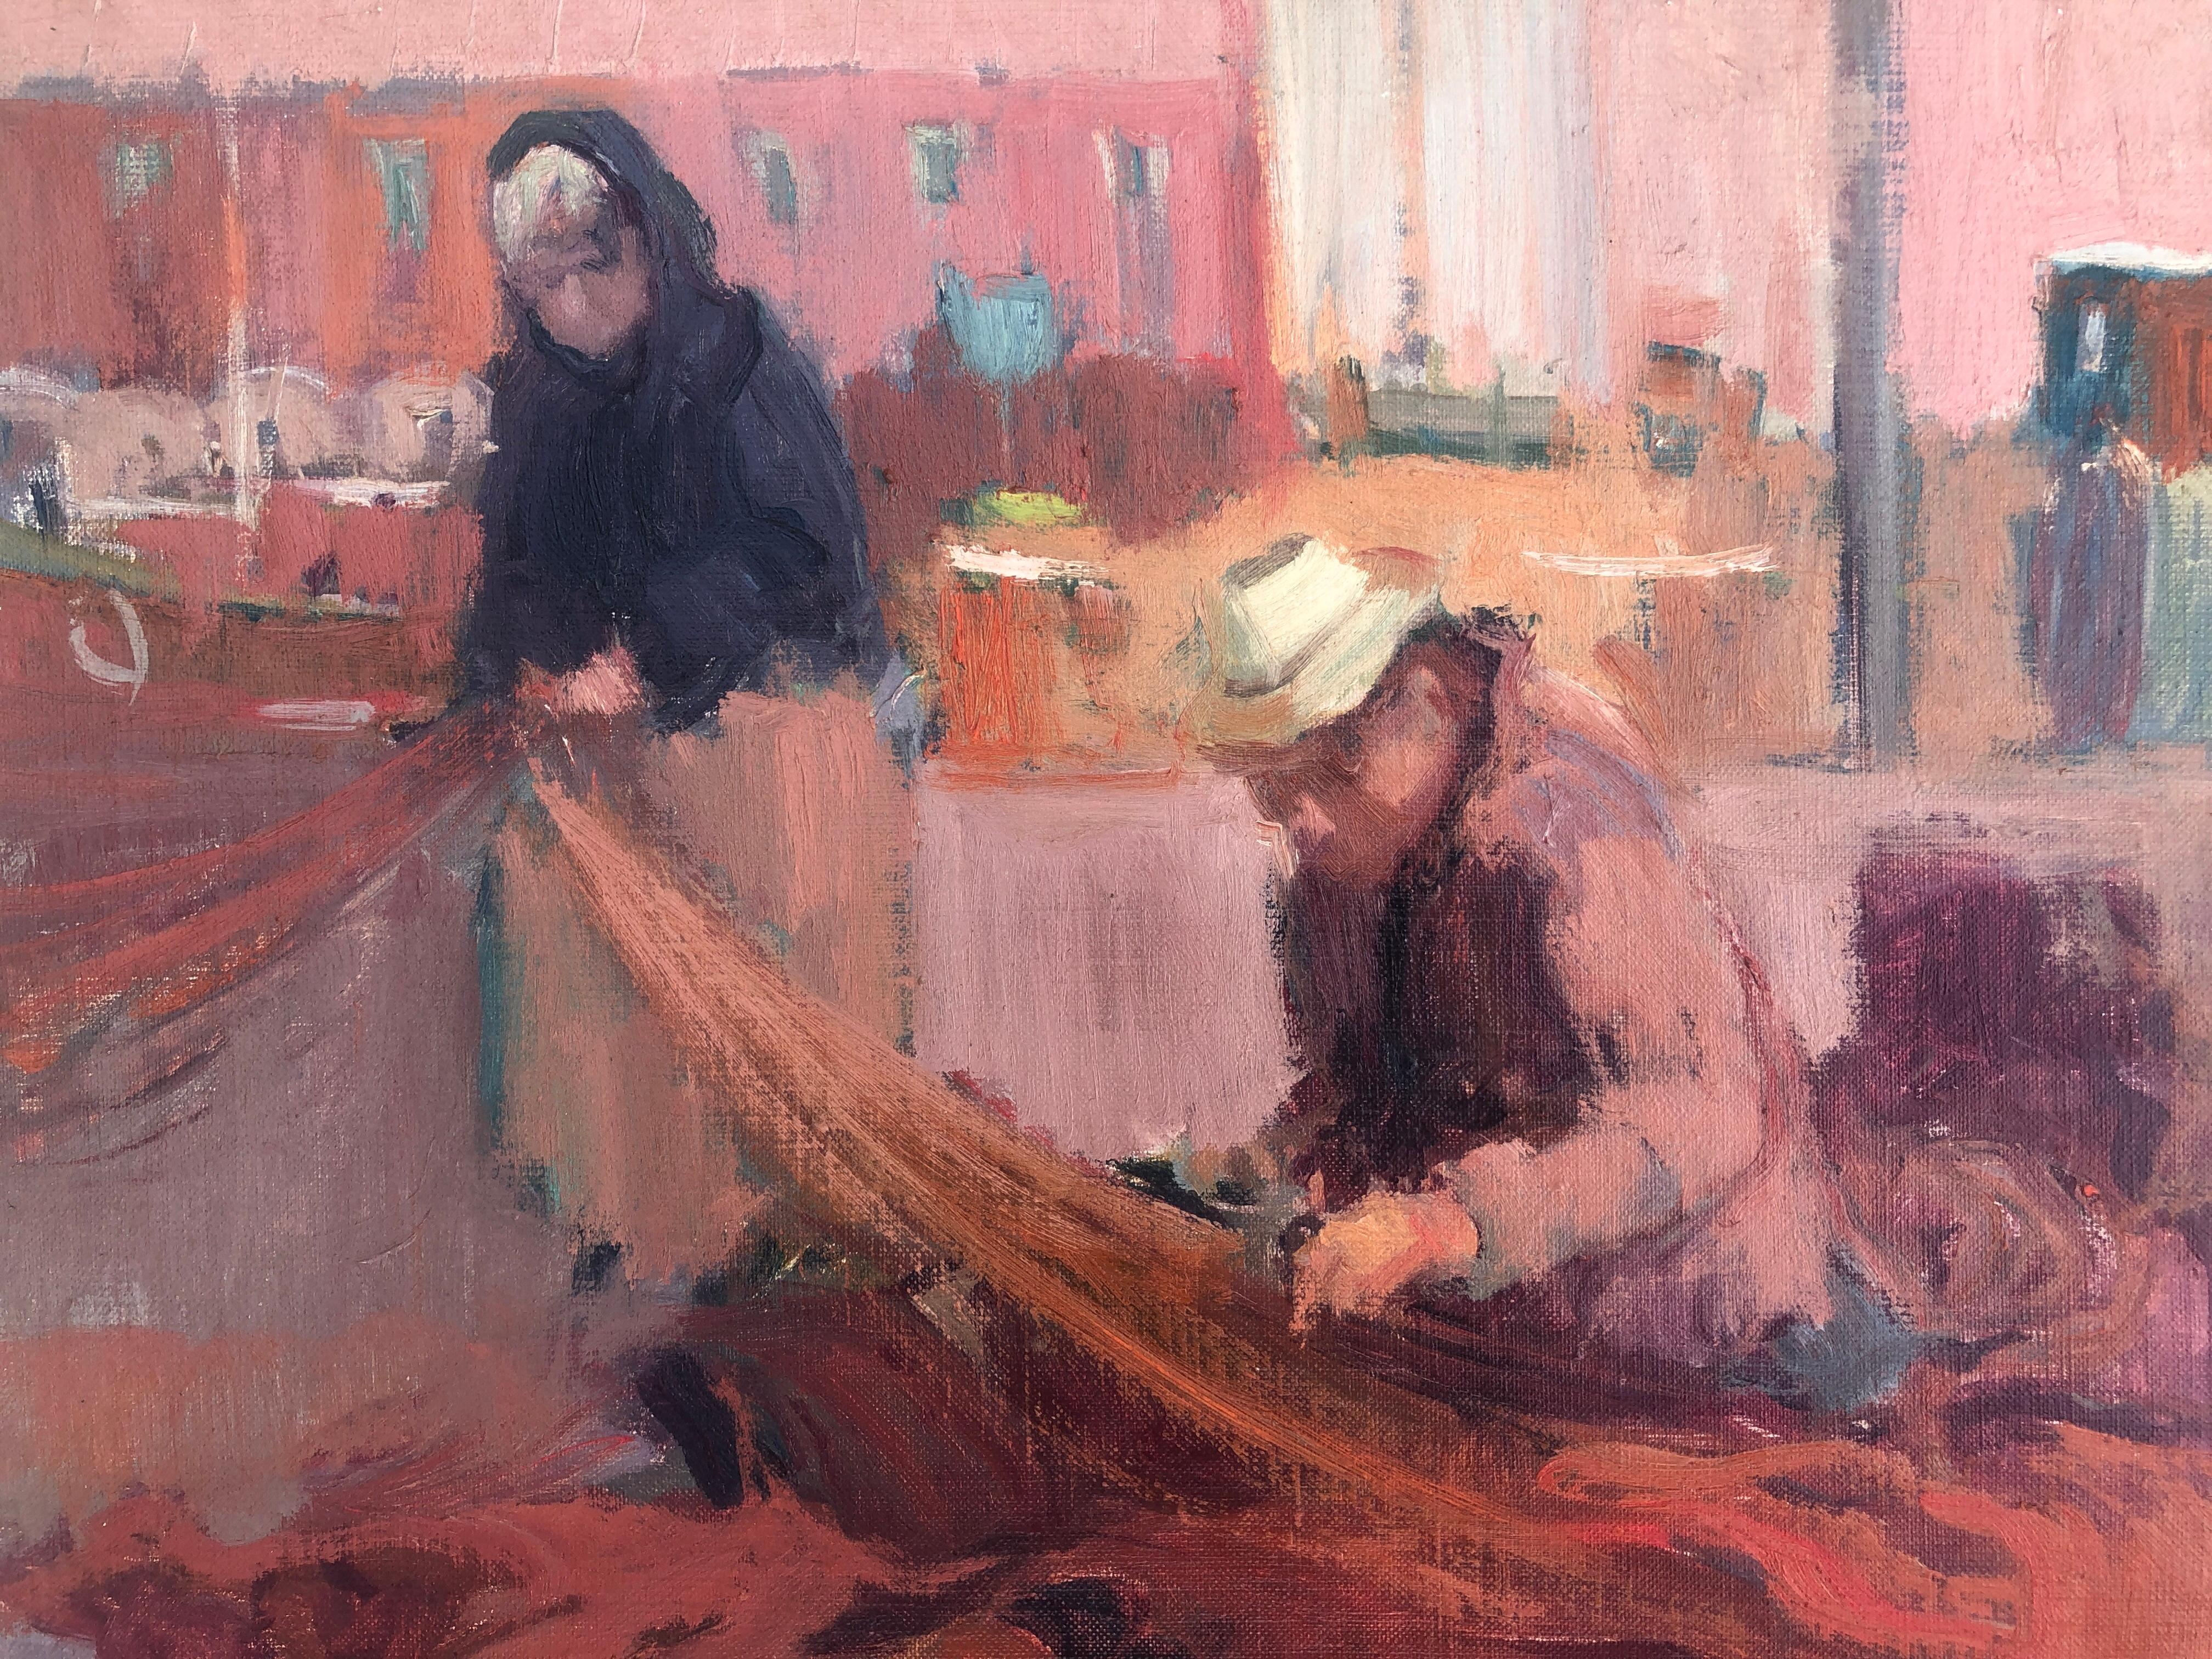 Mending the nets in Llafranc Spain oil on canvas painting - Post-Impressionist Painting by Antonio Sala Herrero